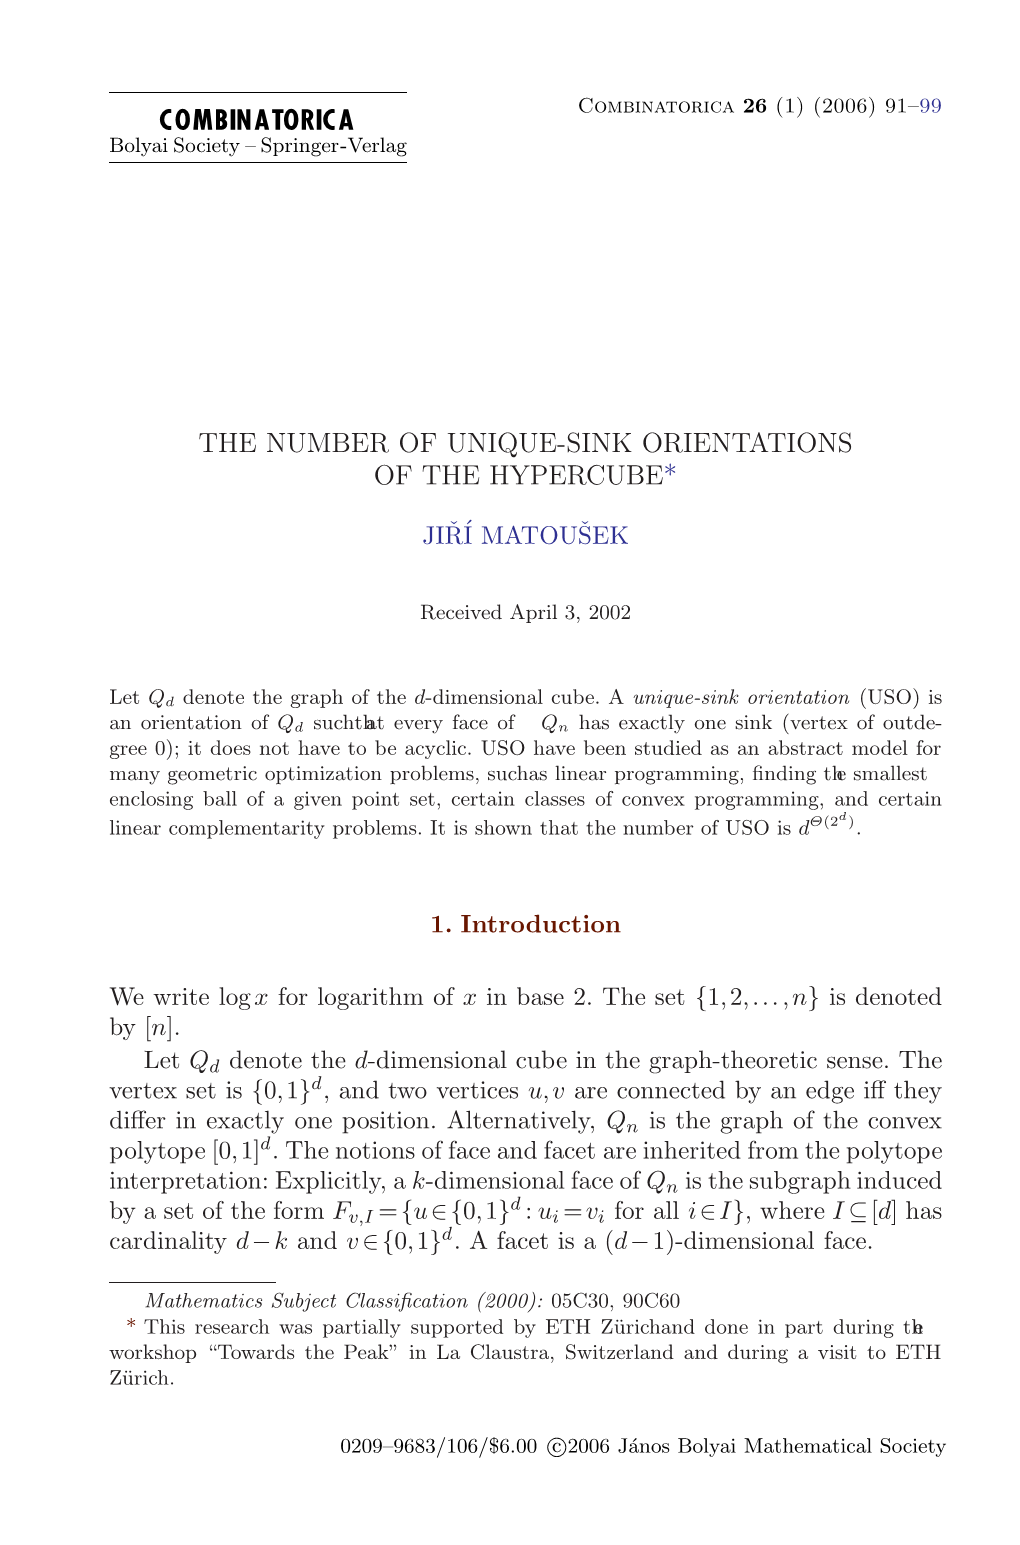 The Number of Unique-Sink Orientations of the Hypercube*